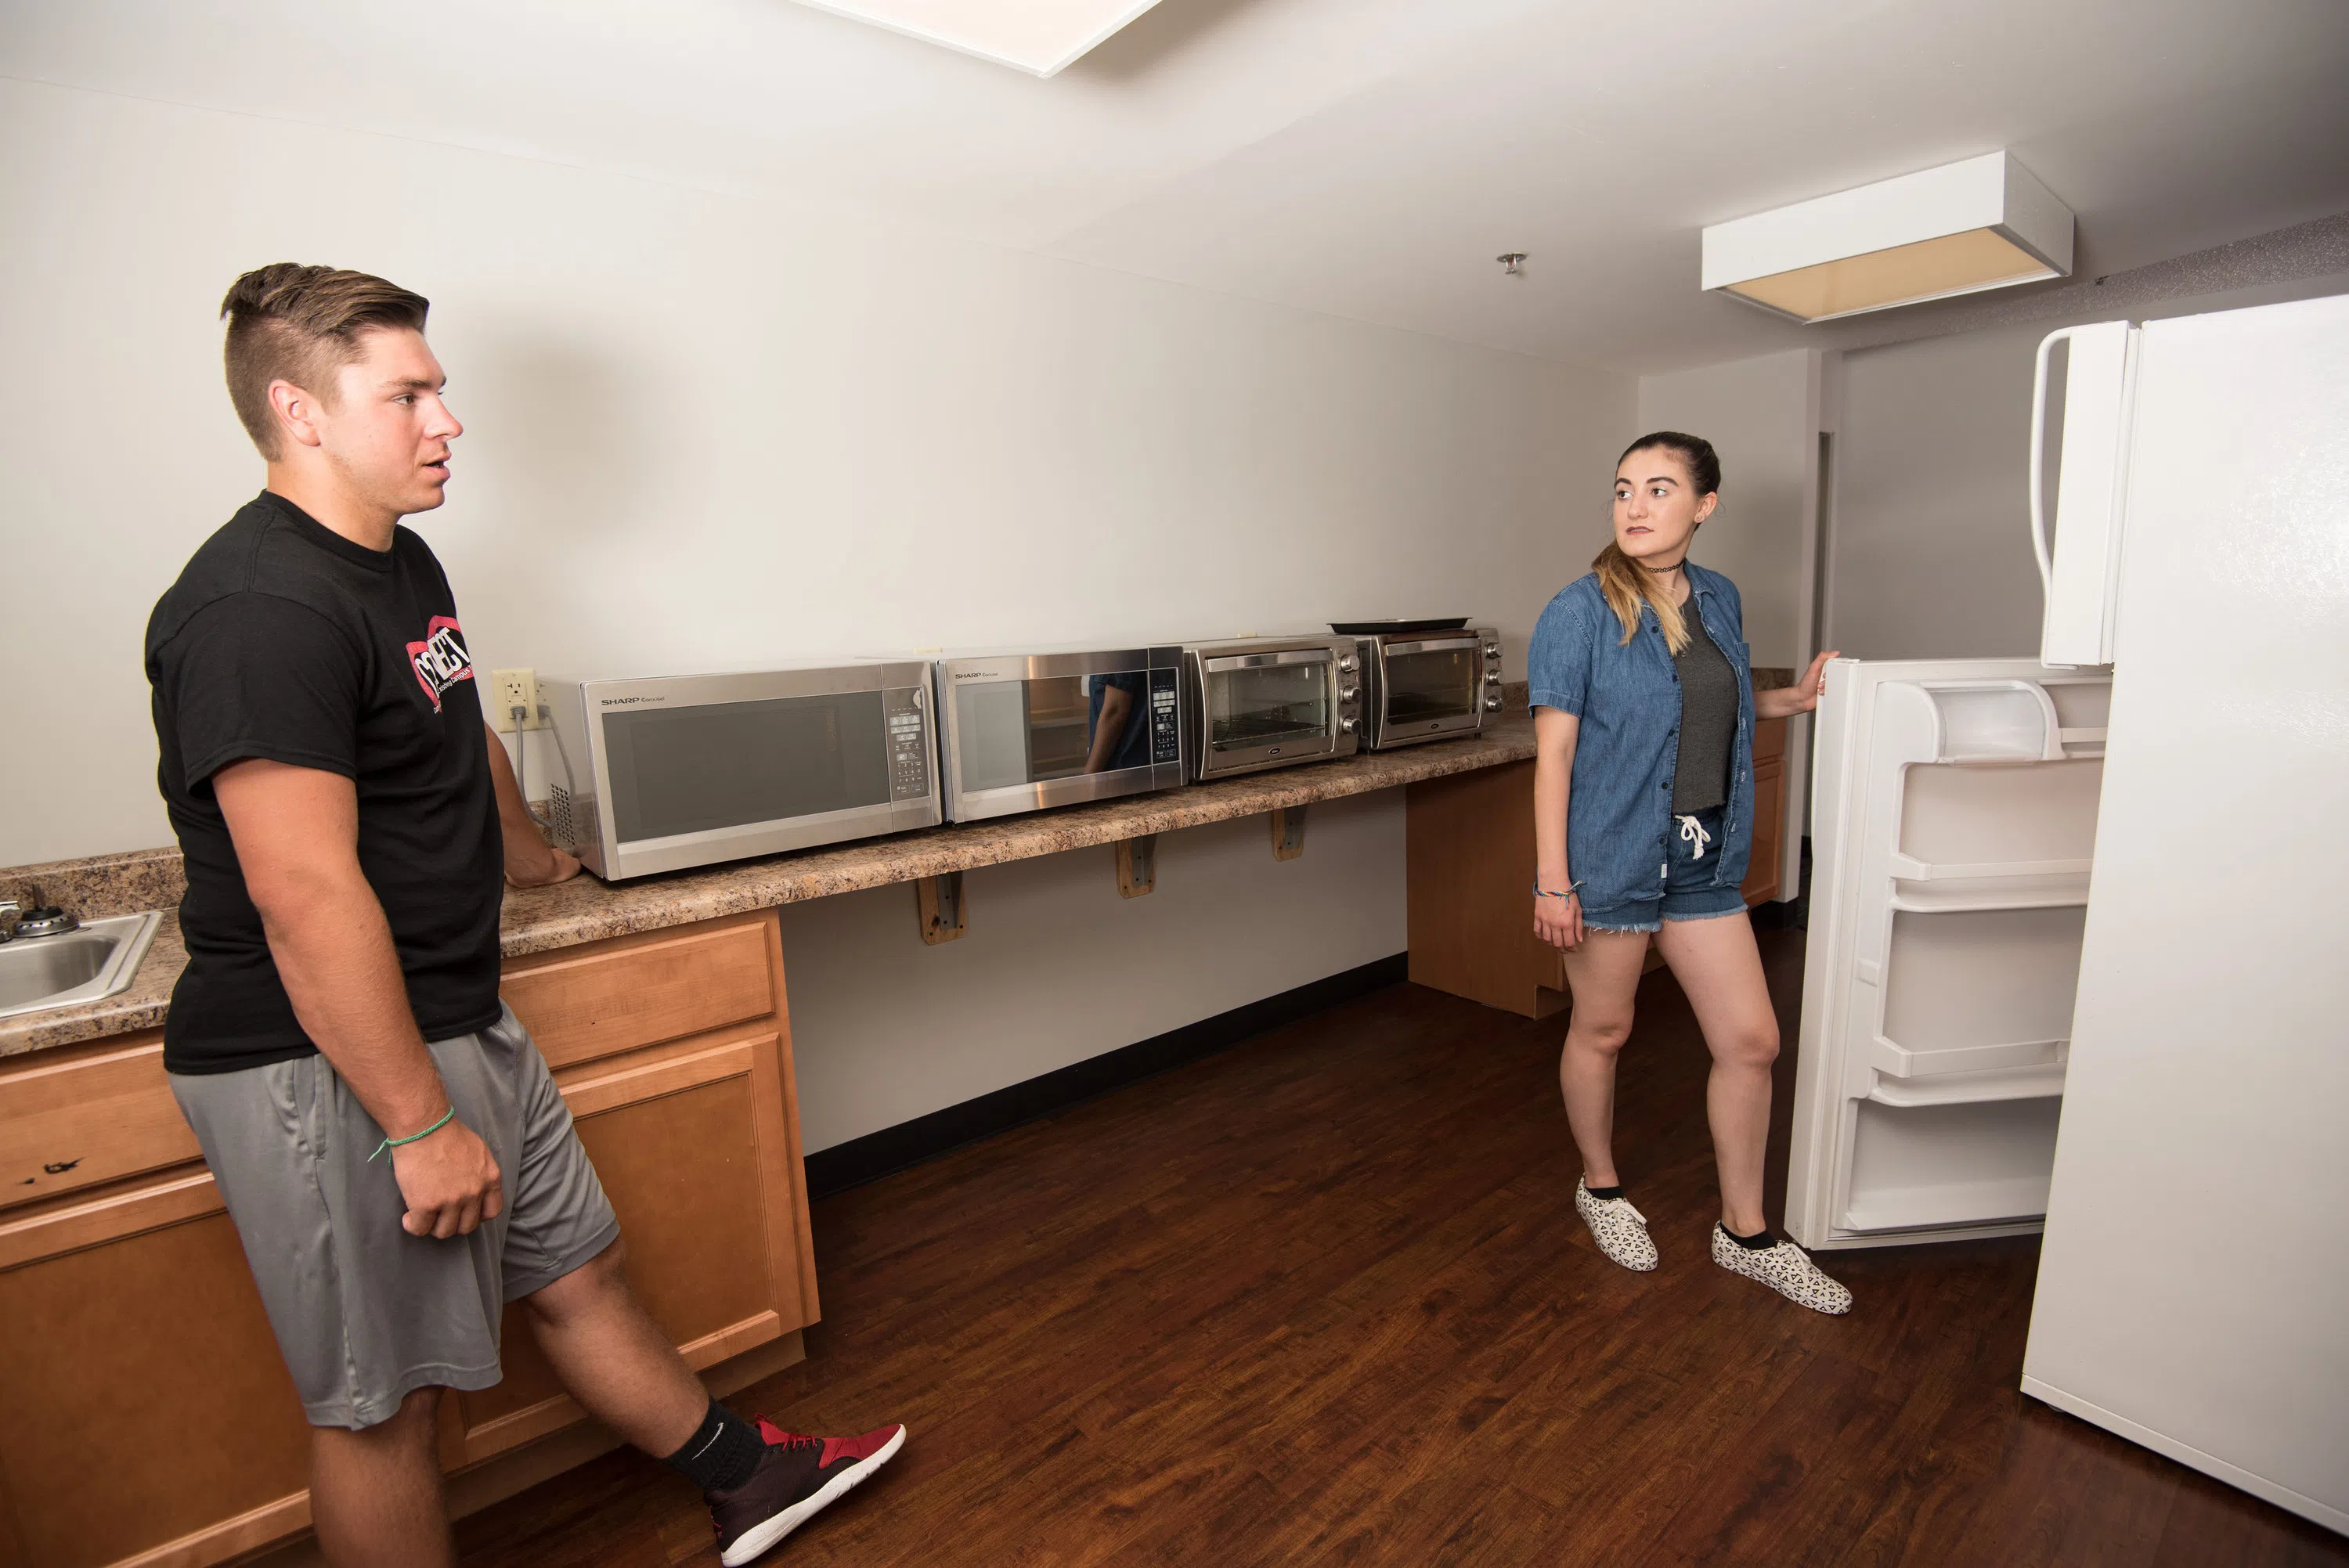 Students access a refridgerator, microwave, and toaster oven in one of the kitchenettes in Potter Hall. 